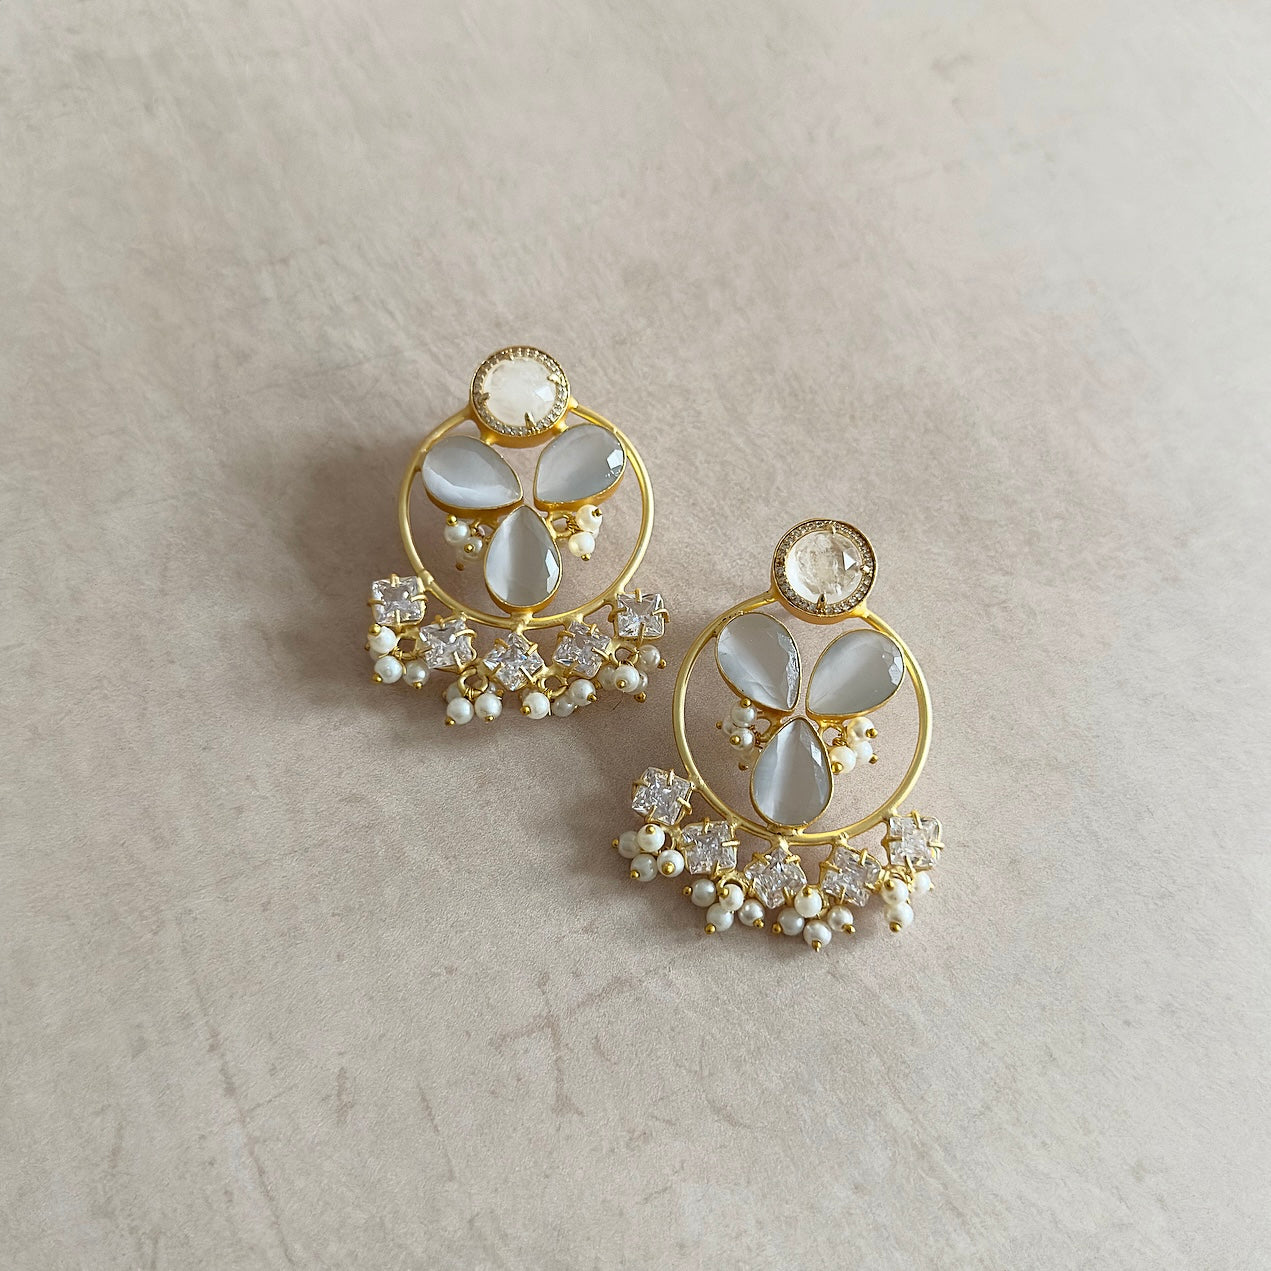 Elevate your look with Belle Grey Crystal Earrings. The statement design features hand cut dove grey stones and sparkling cubic zirconia crystals, adding a touch of sparkle and shine to any outfit. Make a statement with these exquisite earrings.<br>Earring drop 5x4cm